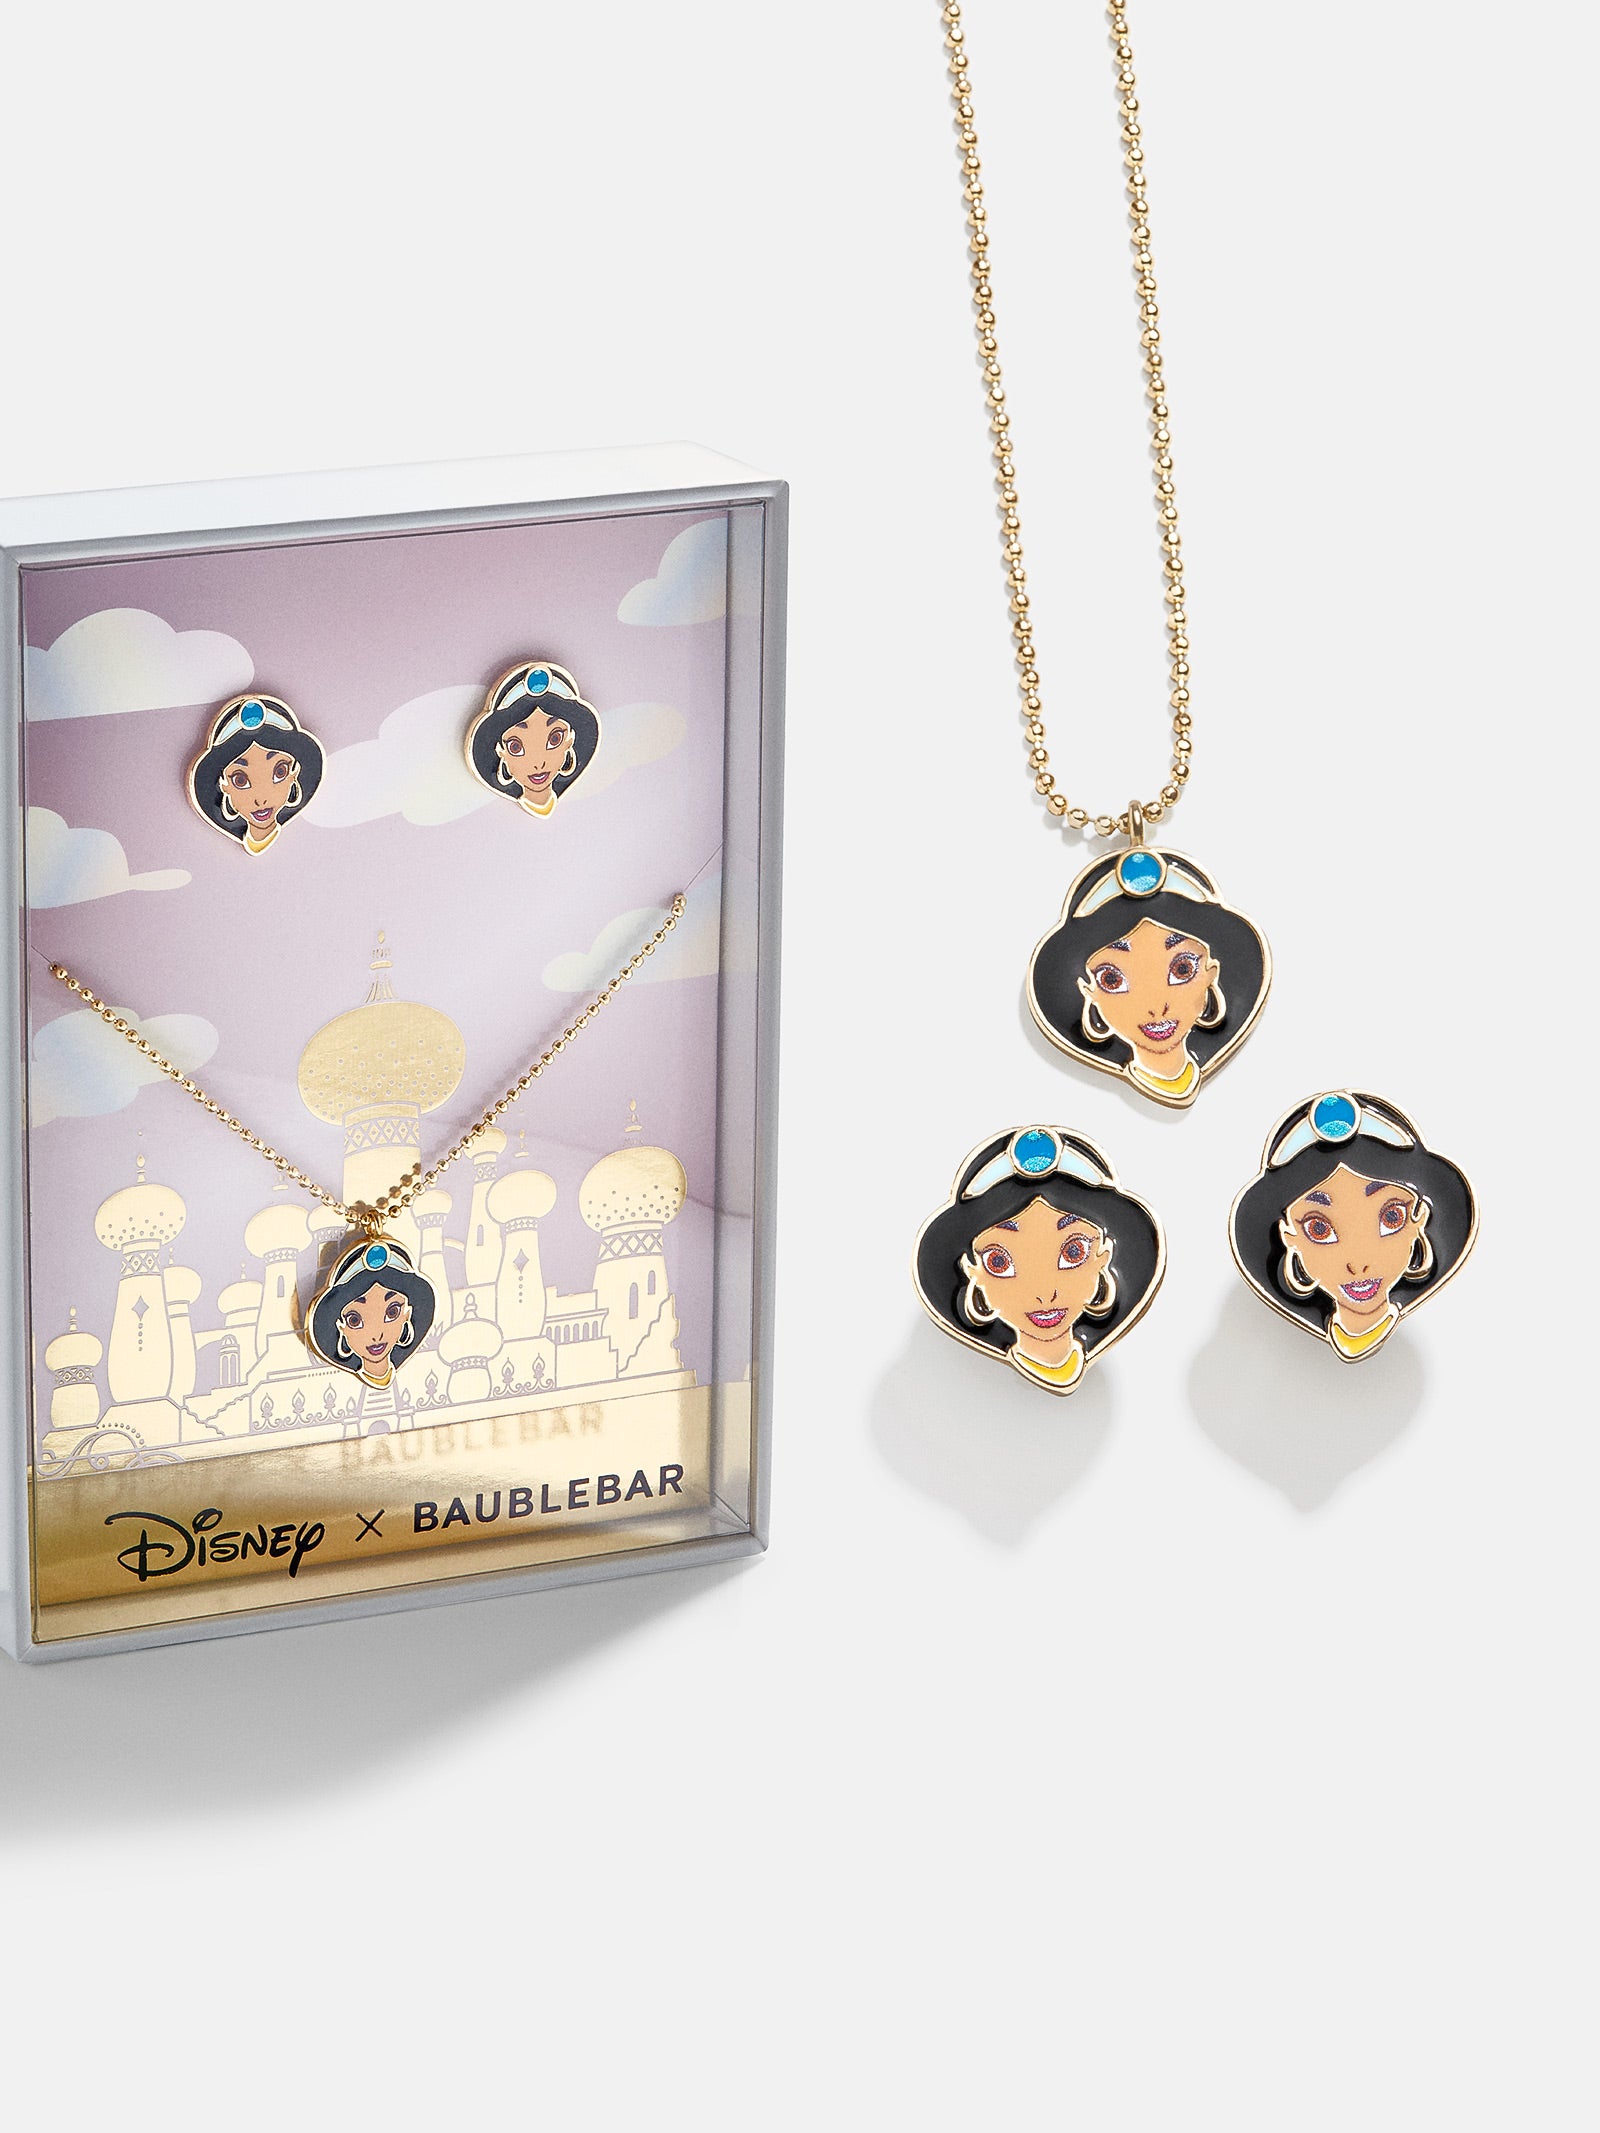 Shop The BaubleBar x Disney Collection Before It Sells Out!